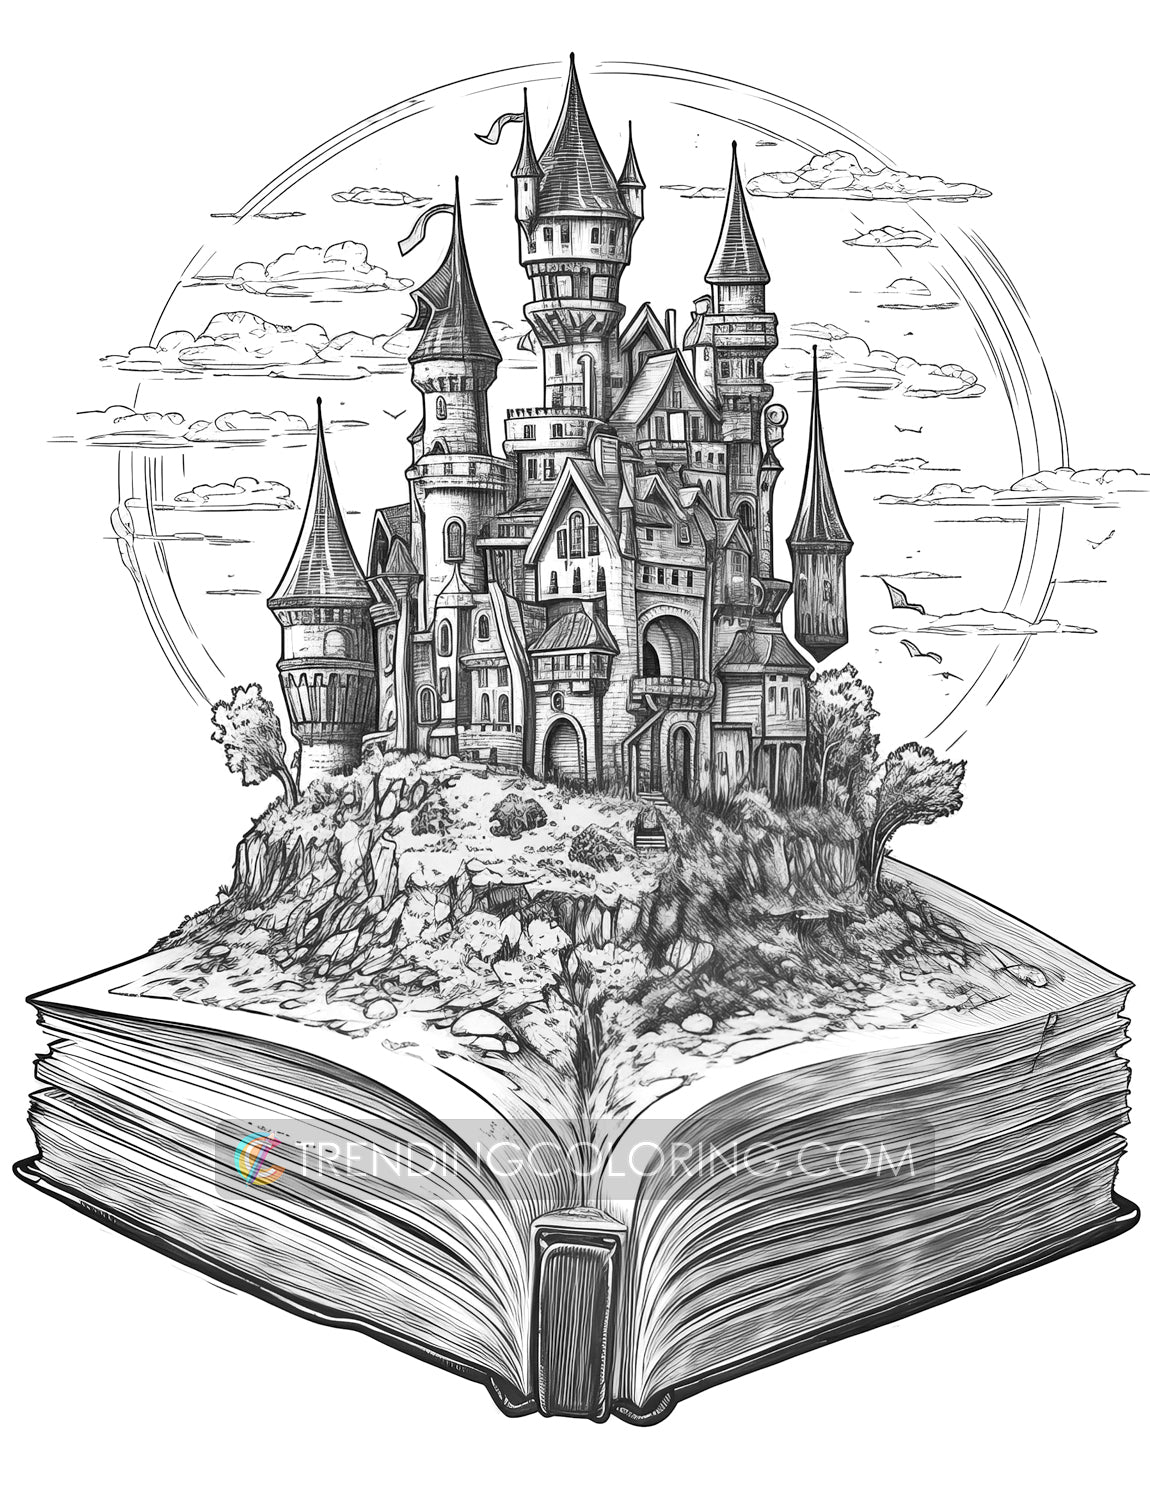 25 Open Magic Book Grayscale Coloring Pages - Instant Download - Printable PDF Dark/Light